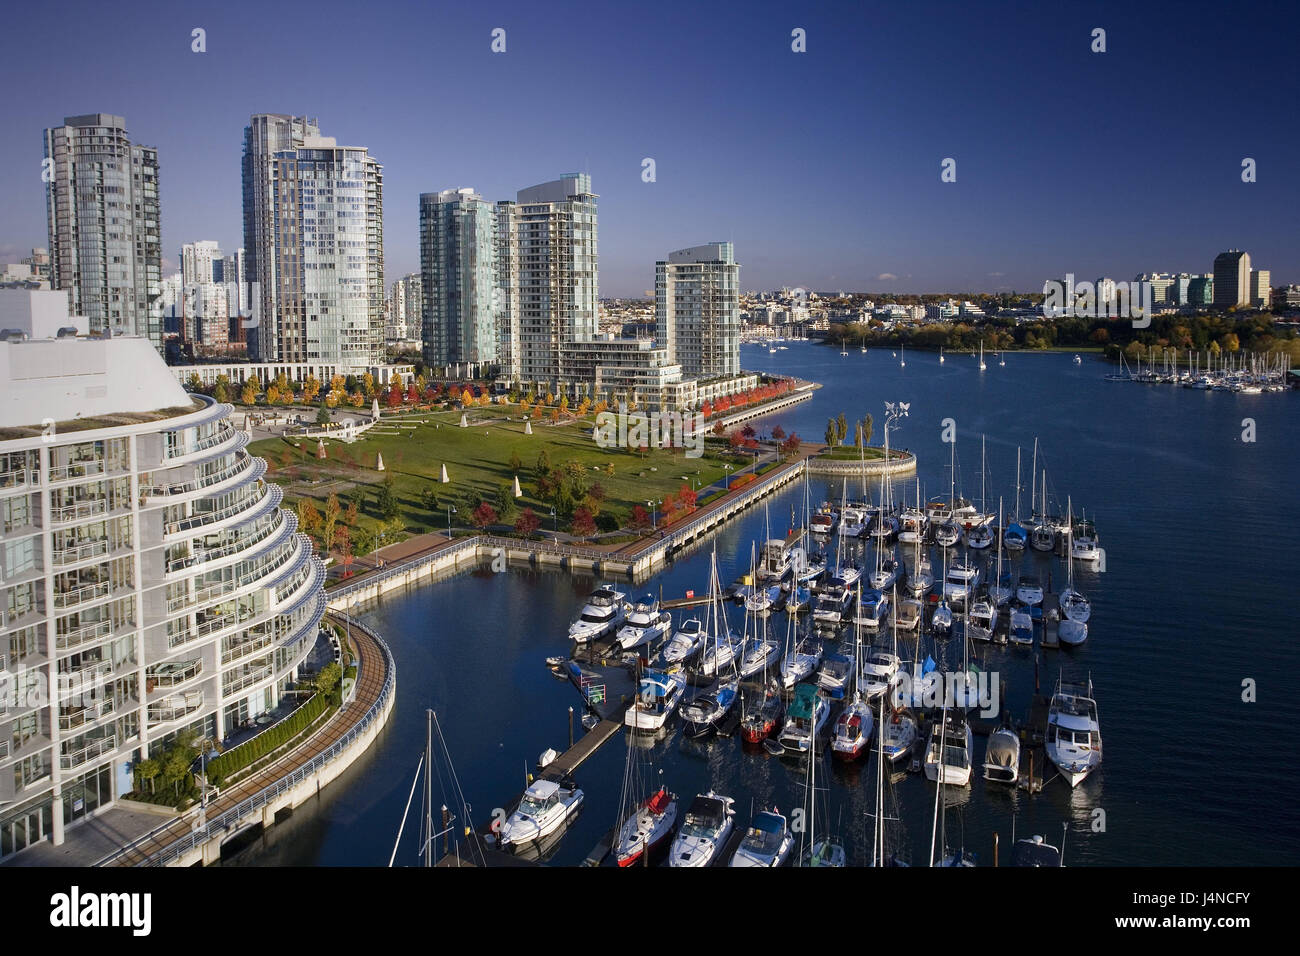 Canada, British Columbia, Vancouver, False Creek, centre of the city, town view, harbour, North America, British Colombia, town, port, high rises, buildings, architecture, water, boats, yacht harbour, yachts, Stock Photo